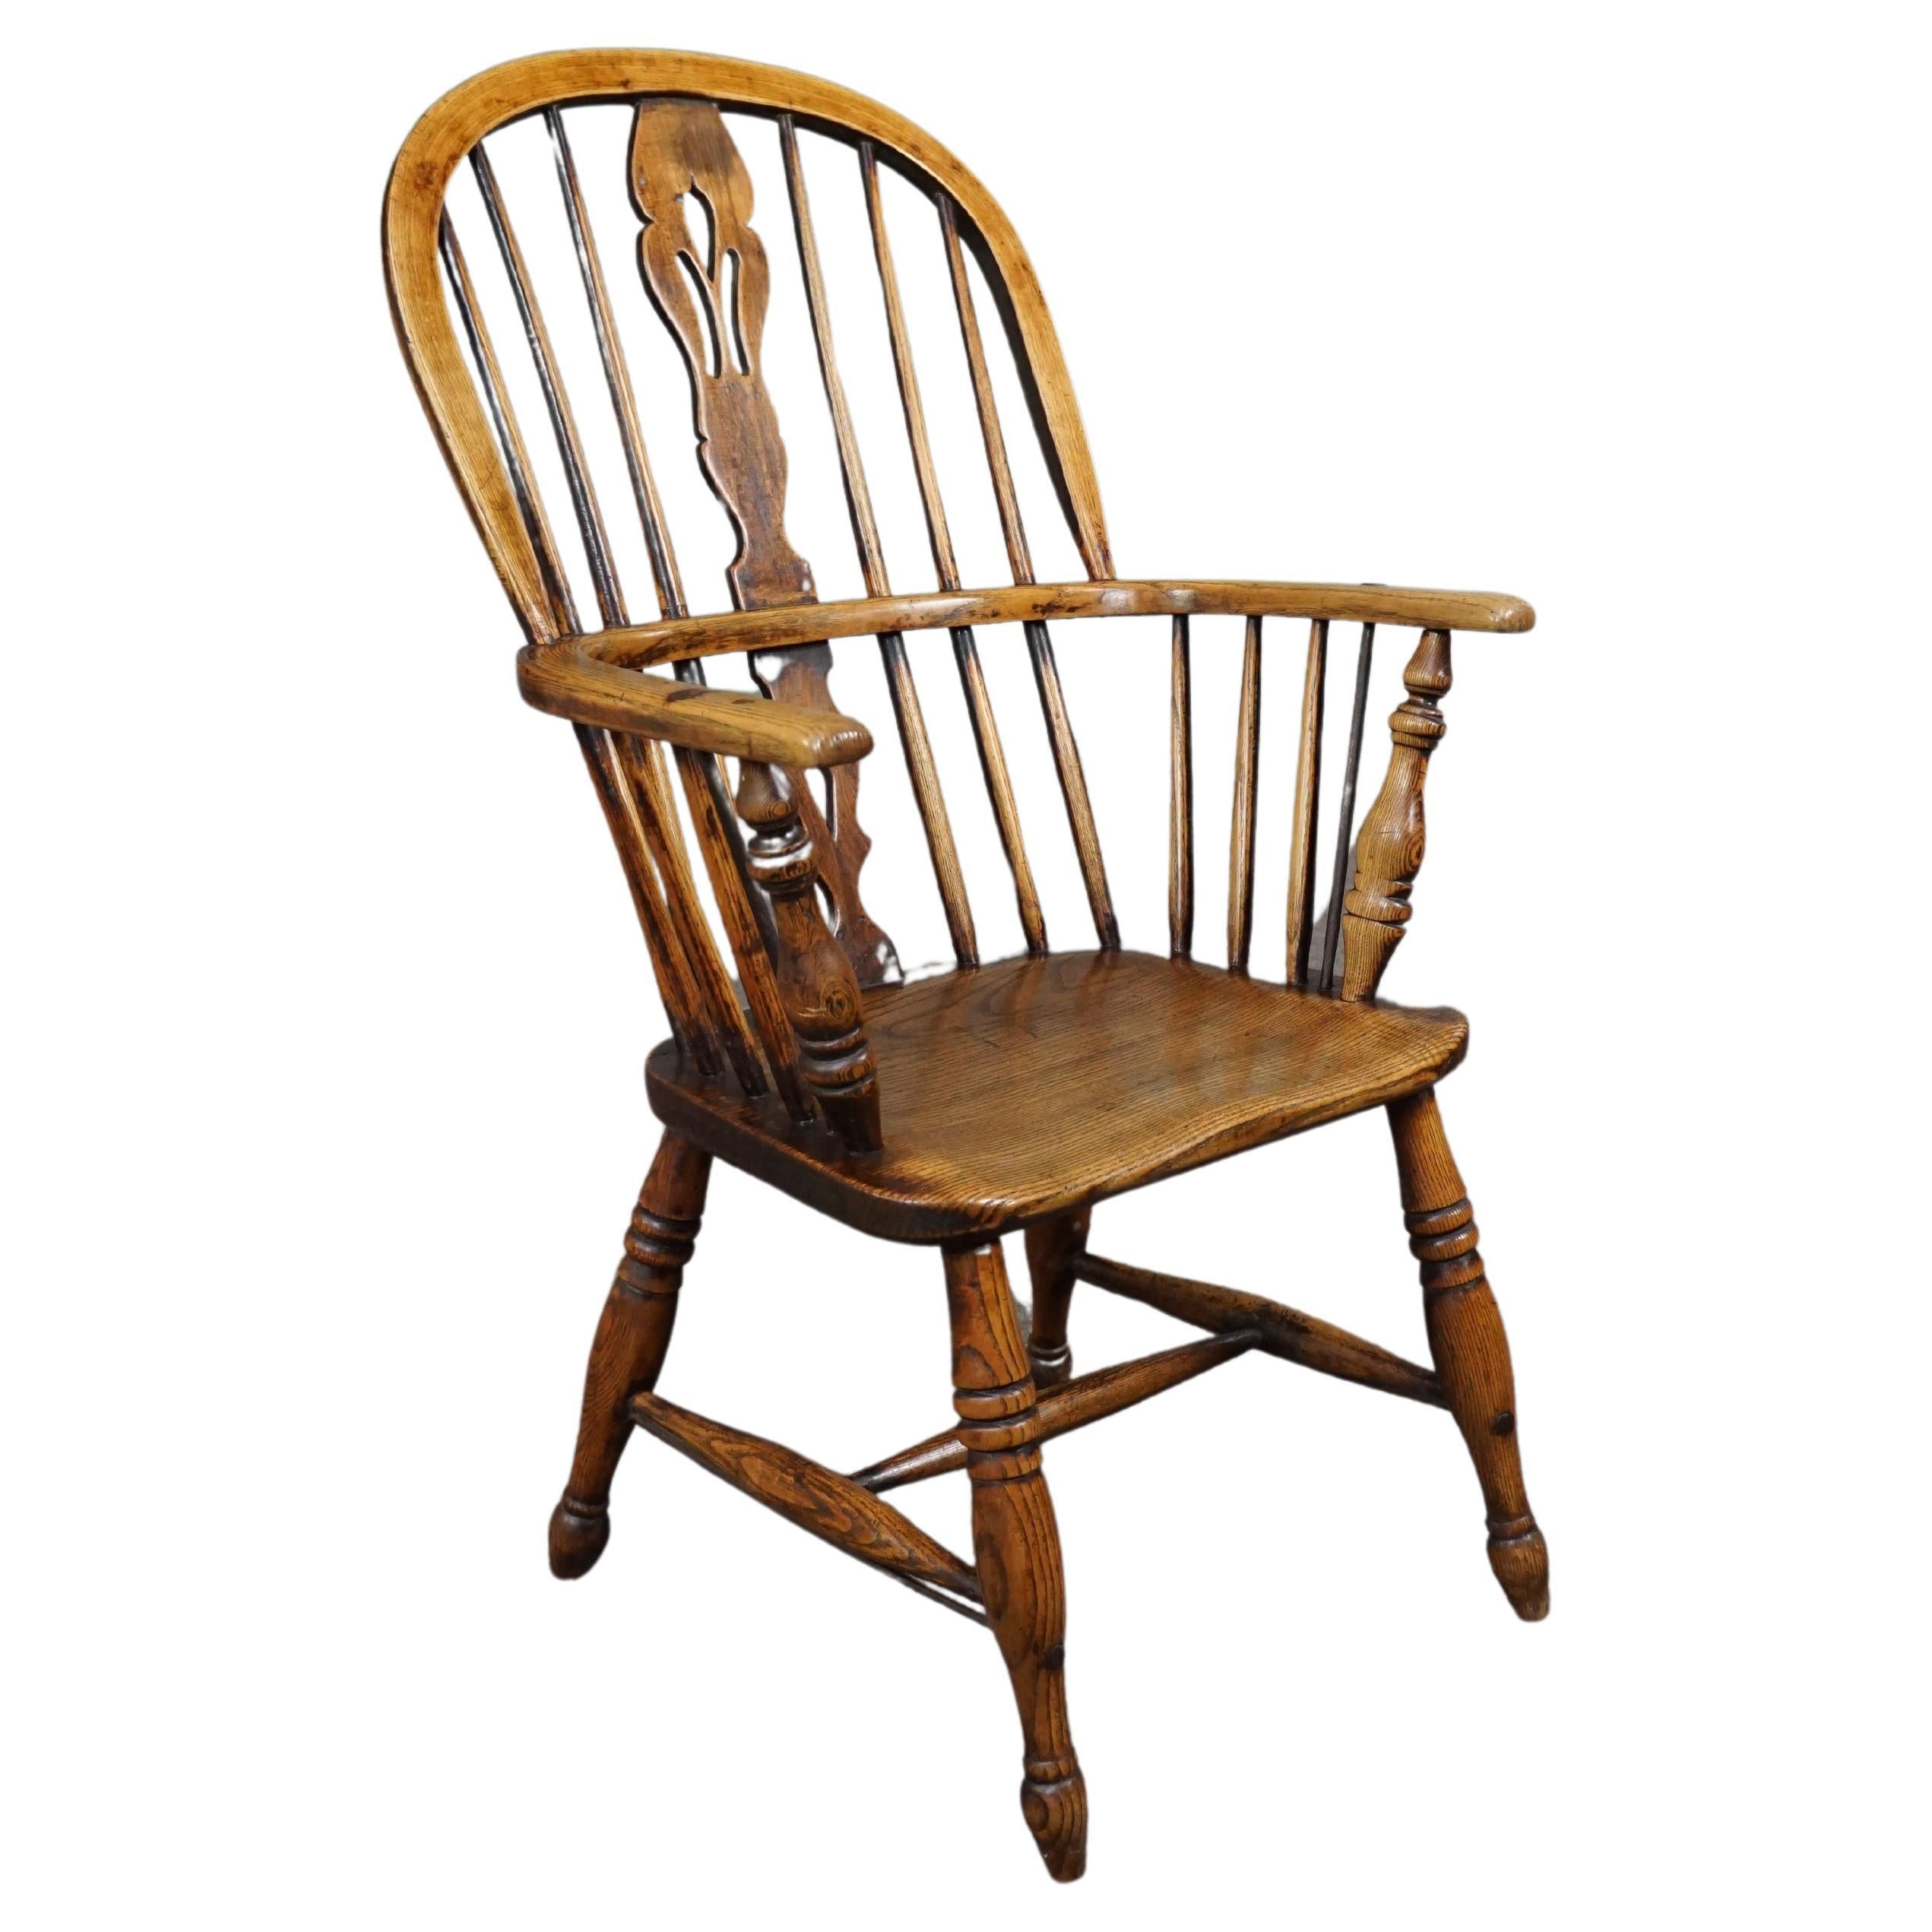 English antique High Back Windsor armchair/chair, 18th century For Sale